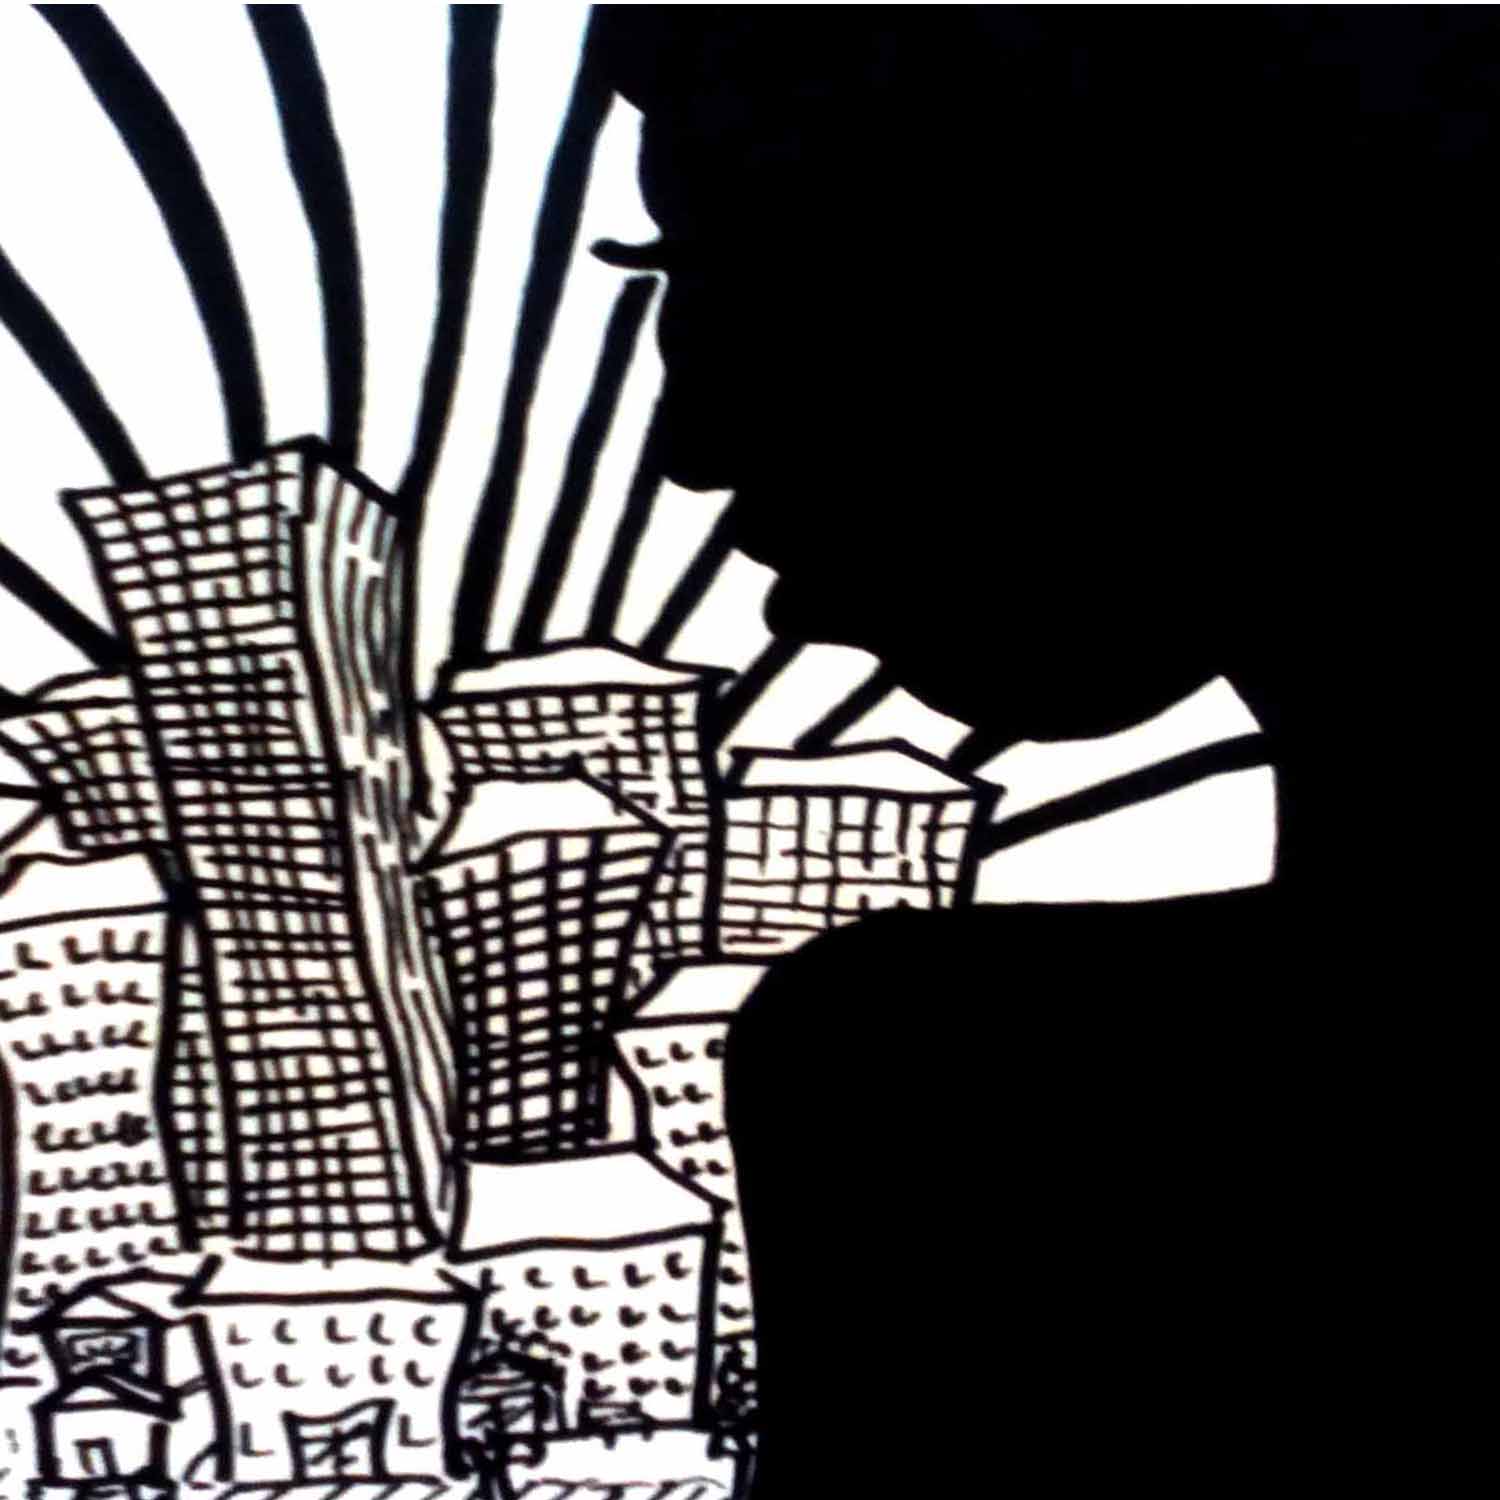 Concrete Jungle - By Jennifer Kennedy ink city on paper with a face profile